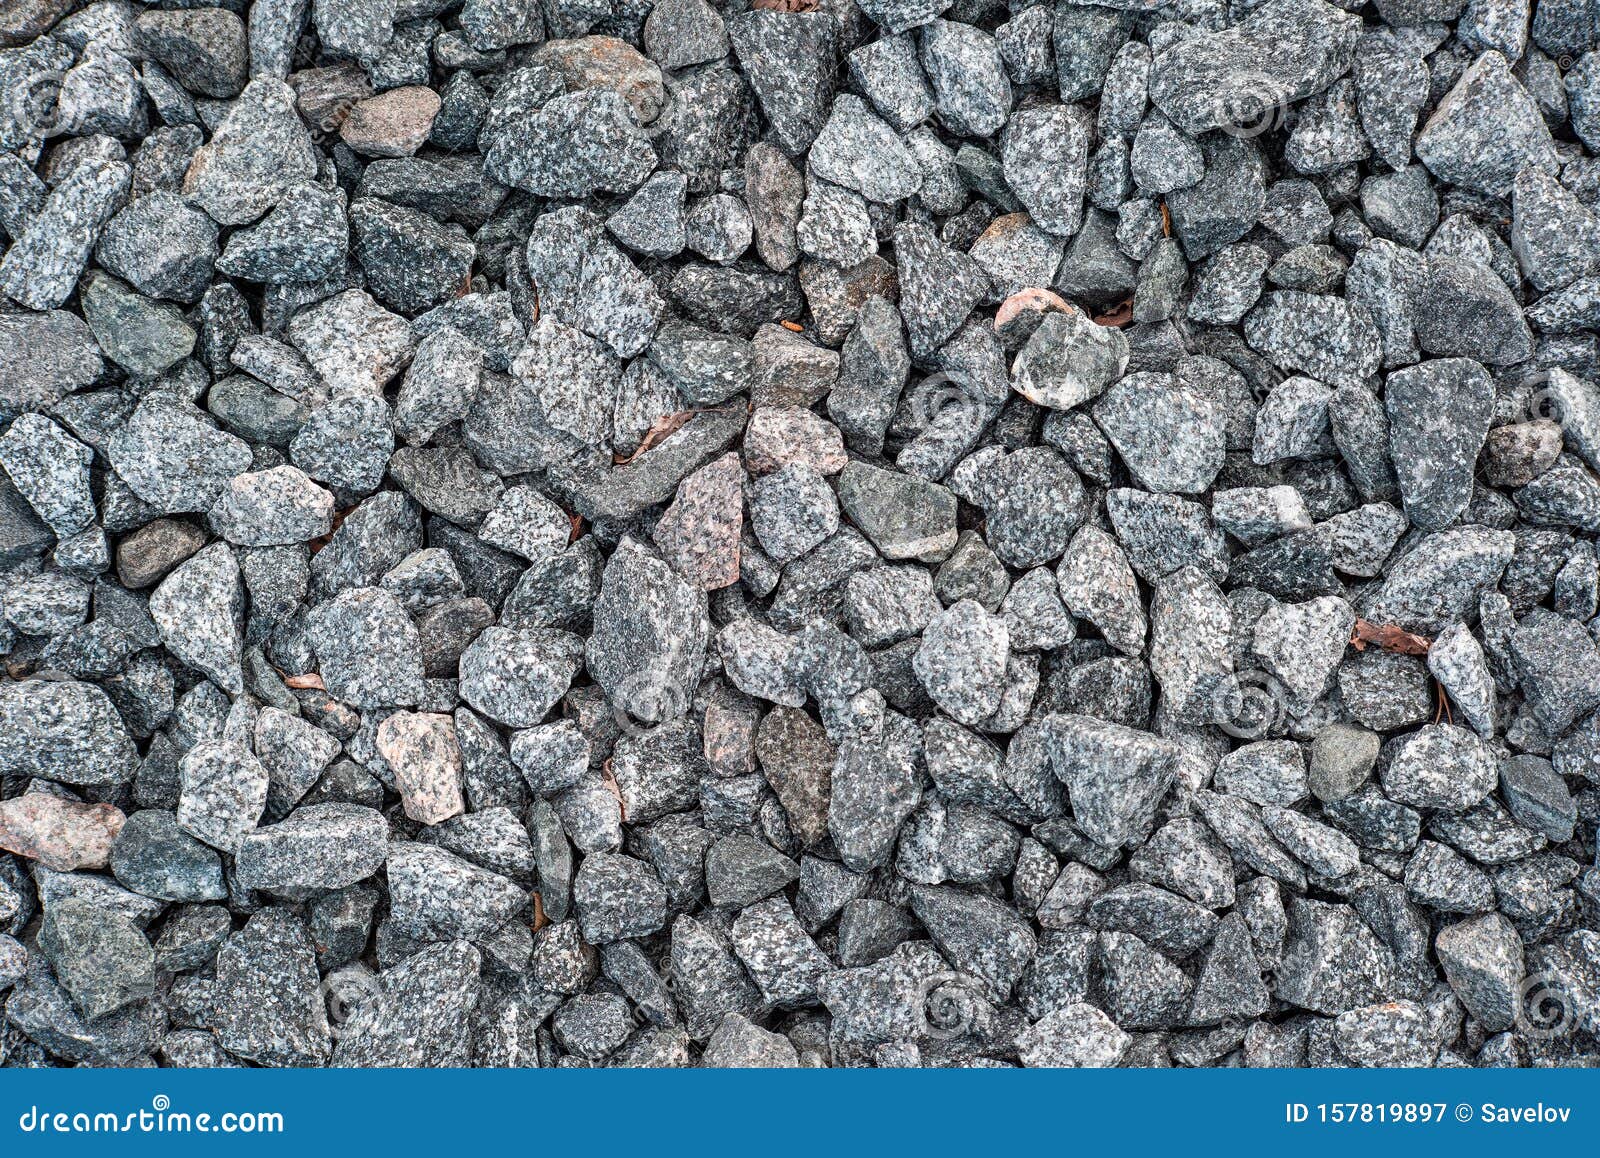 The Gravel on Top Stock Image - Image of construction, abstract: